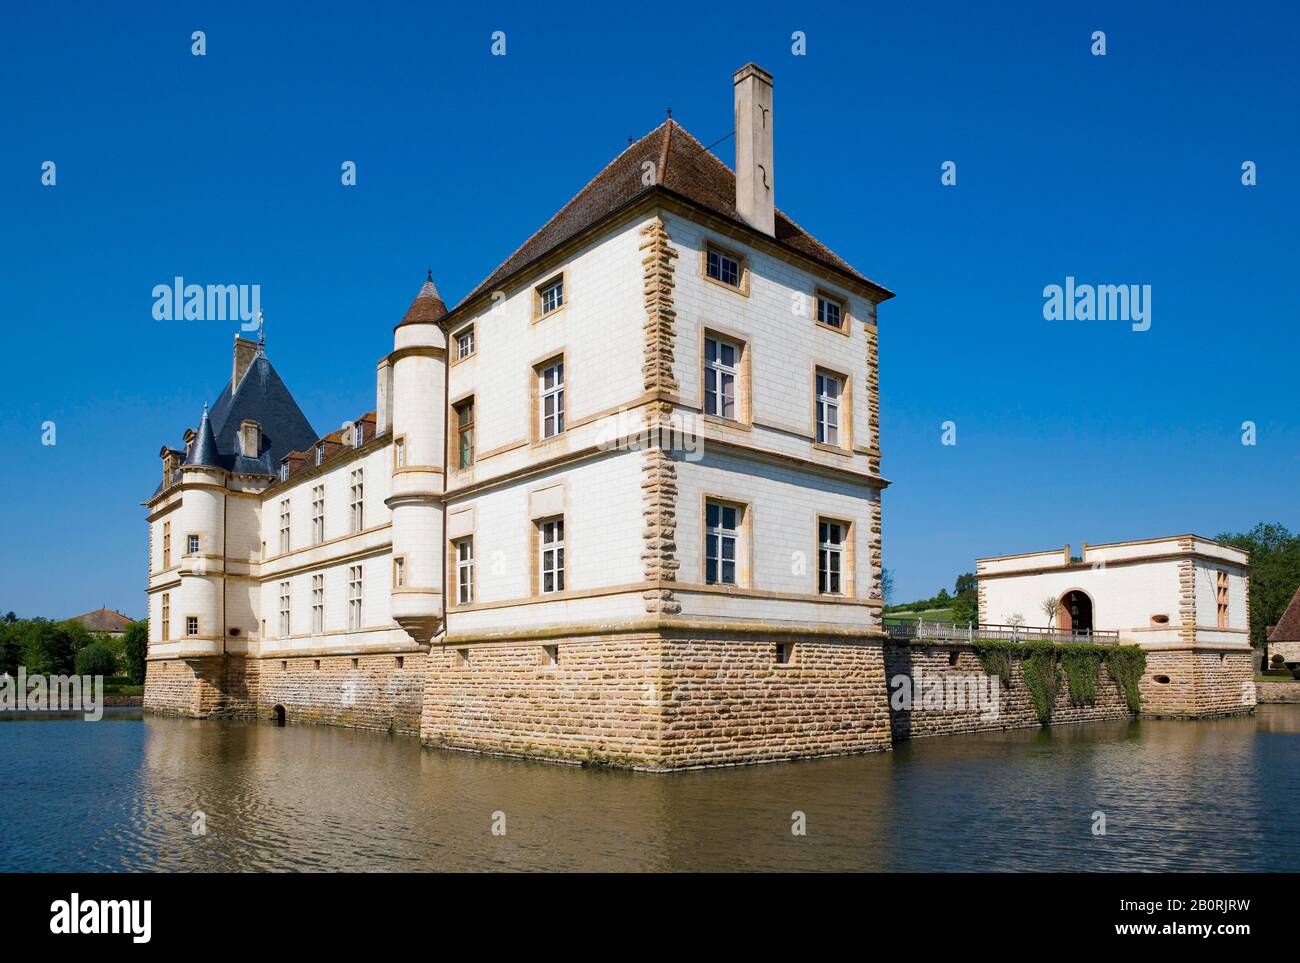 Moated castle, Castle of Cormatin, Cormatin, Department Saone et Loire, Burgundy, France Stock Photo